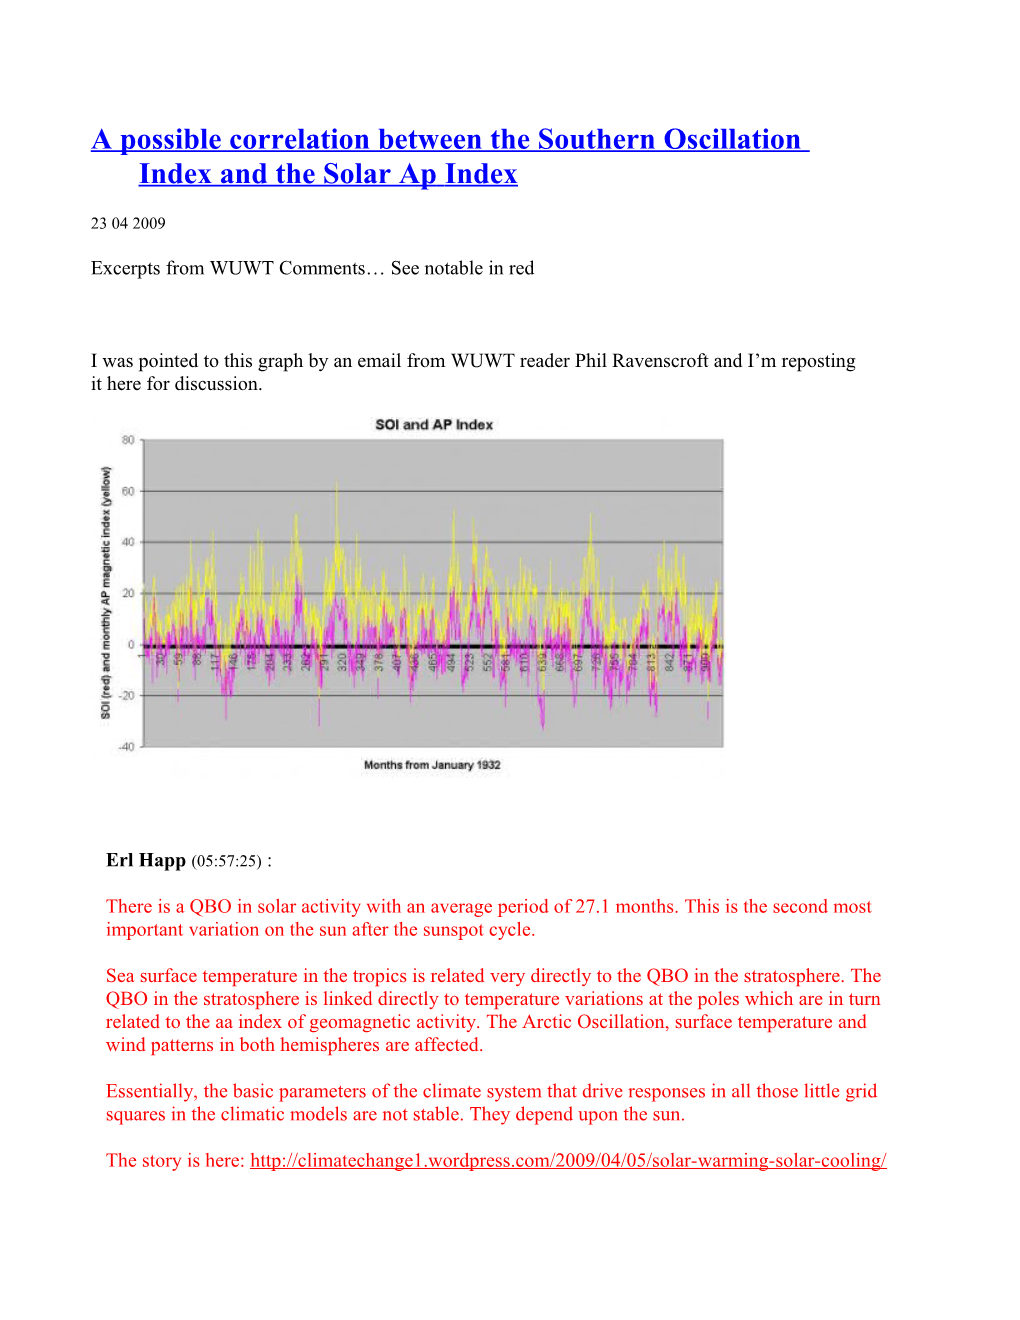 A Possible Correlation Between the Southern Oscillation Index and the Solar Ap Index